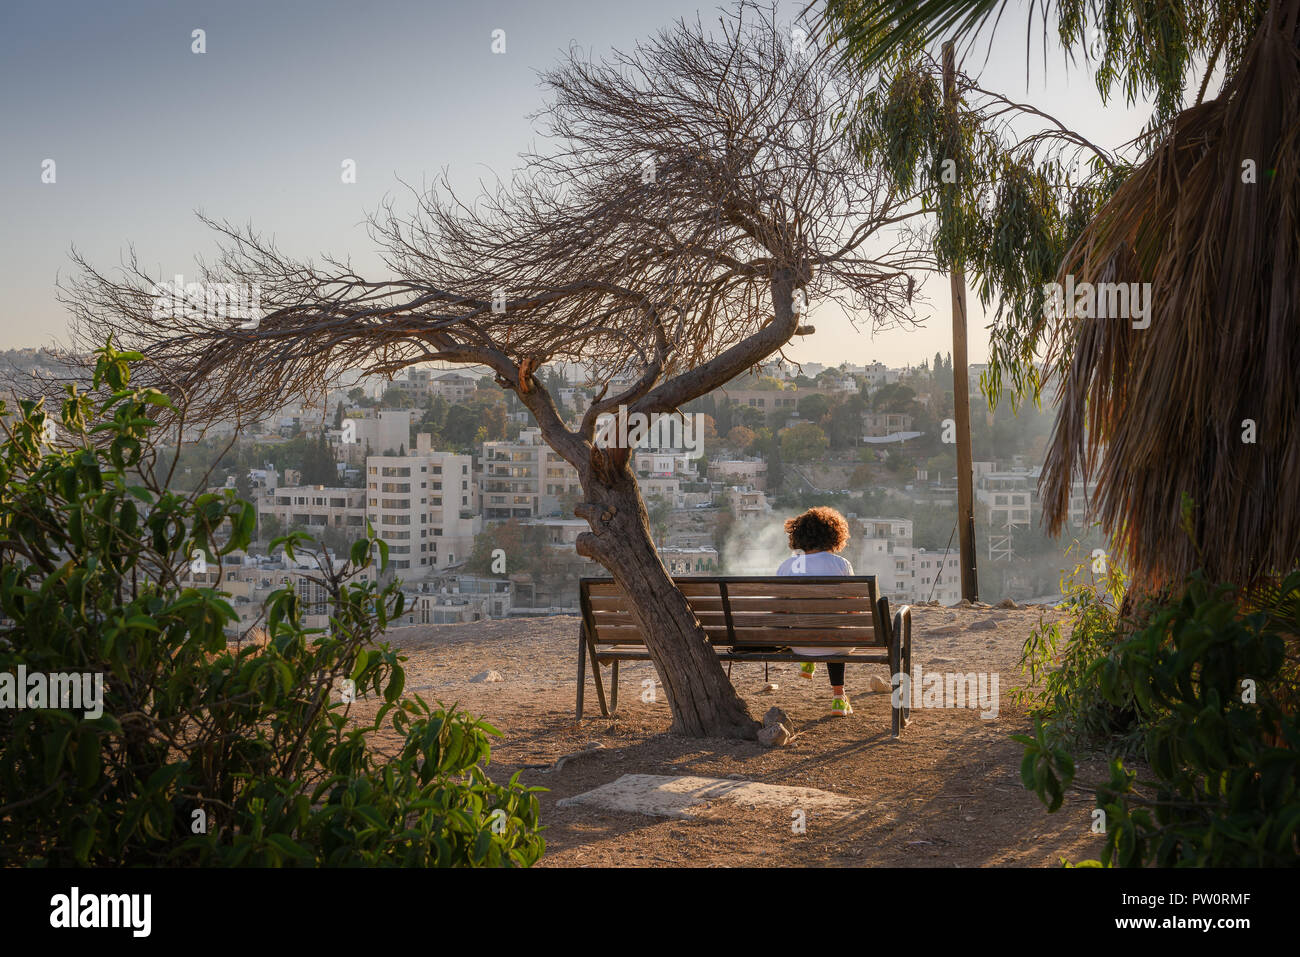 Amman, Jordan its Roman ruins in the middle of the ancient citadel park in the center of the city. Sunset on Skyline of Amman and old town of the city Stock Photo